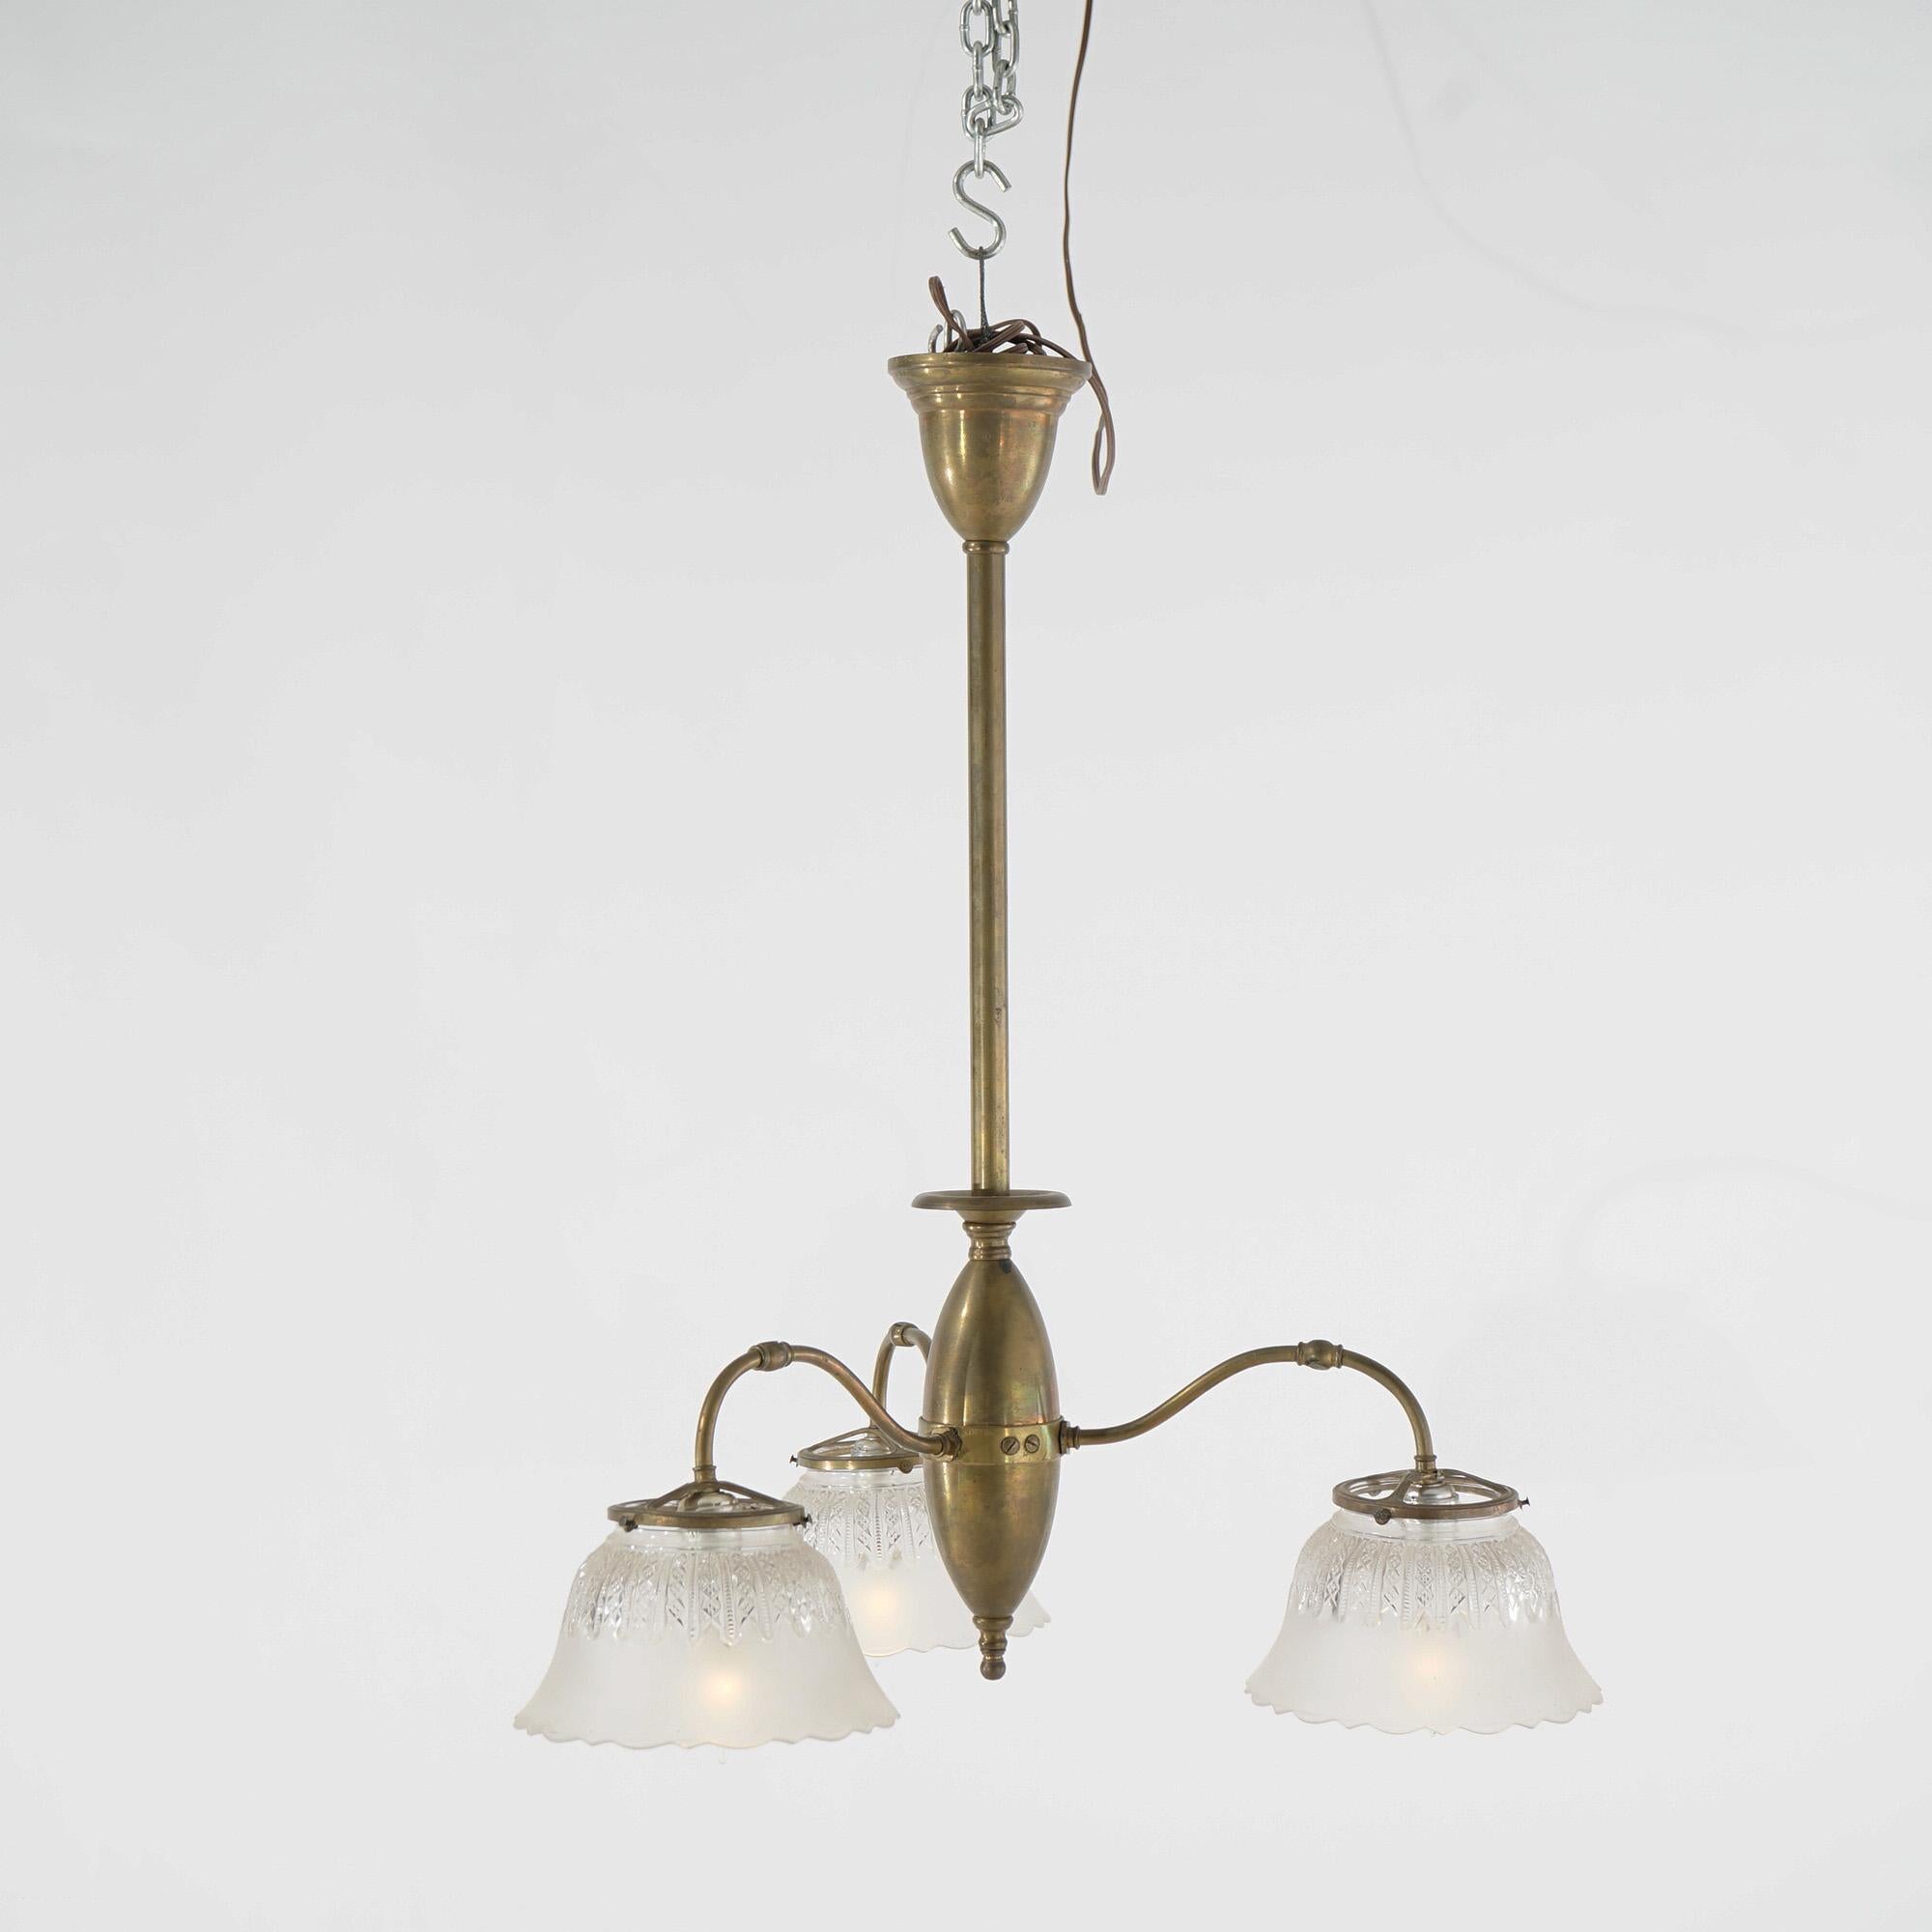 American Antique Victorian Three-Light Brass & Glass Early Electric Fixture, 19th C